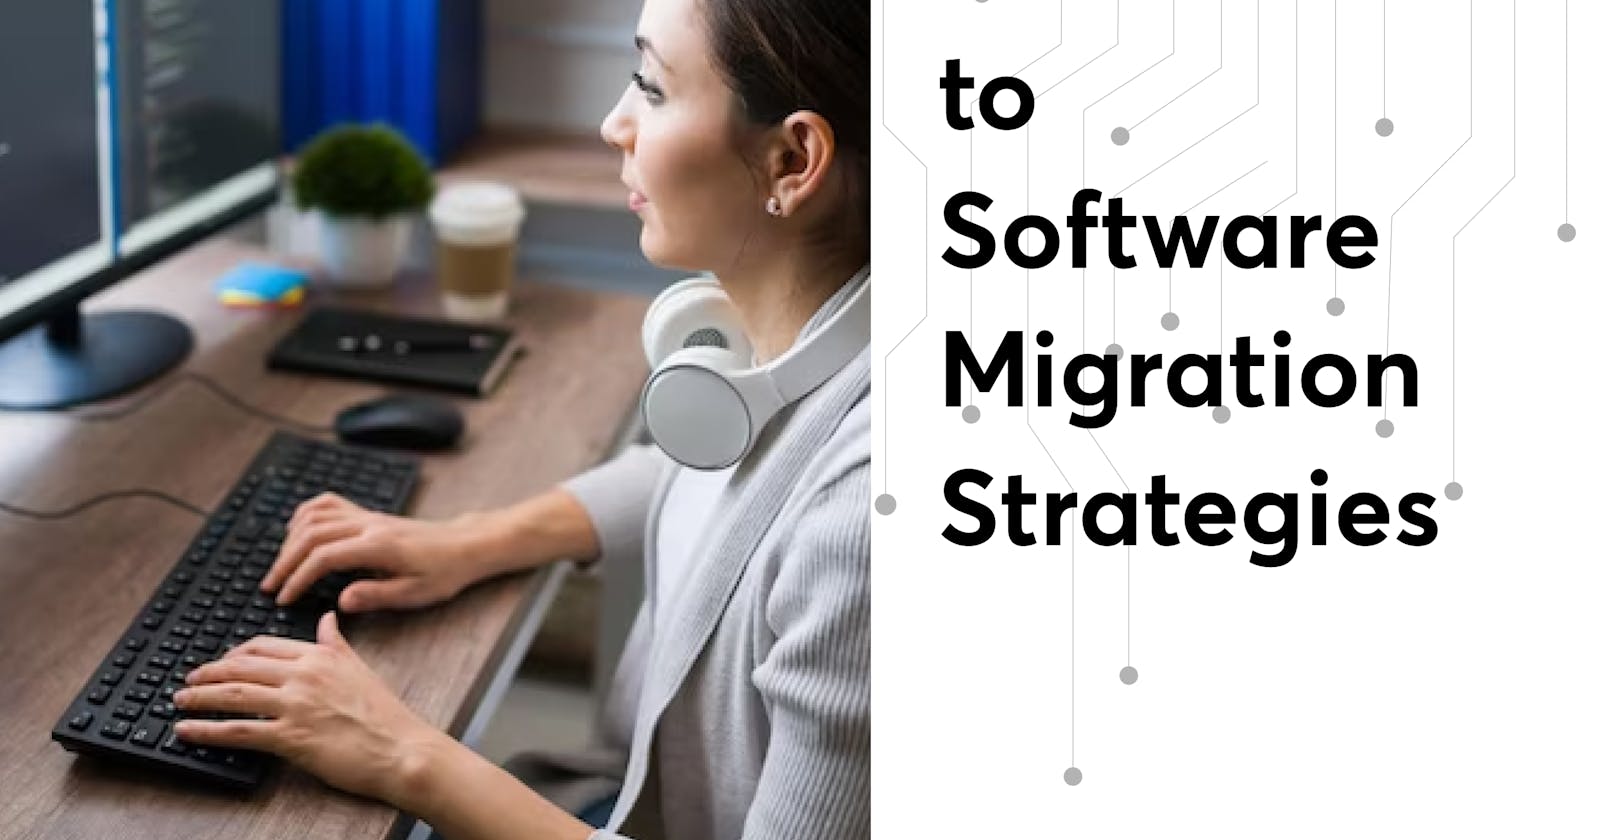 A Guide to Software Migration Strategies